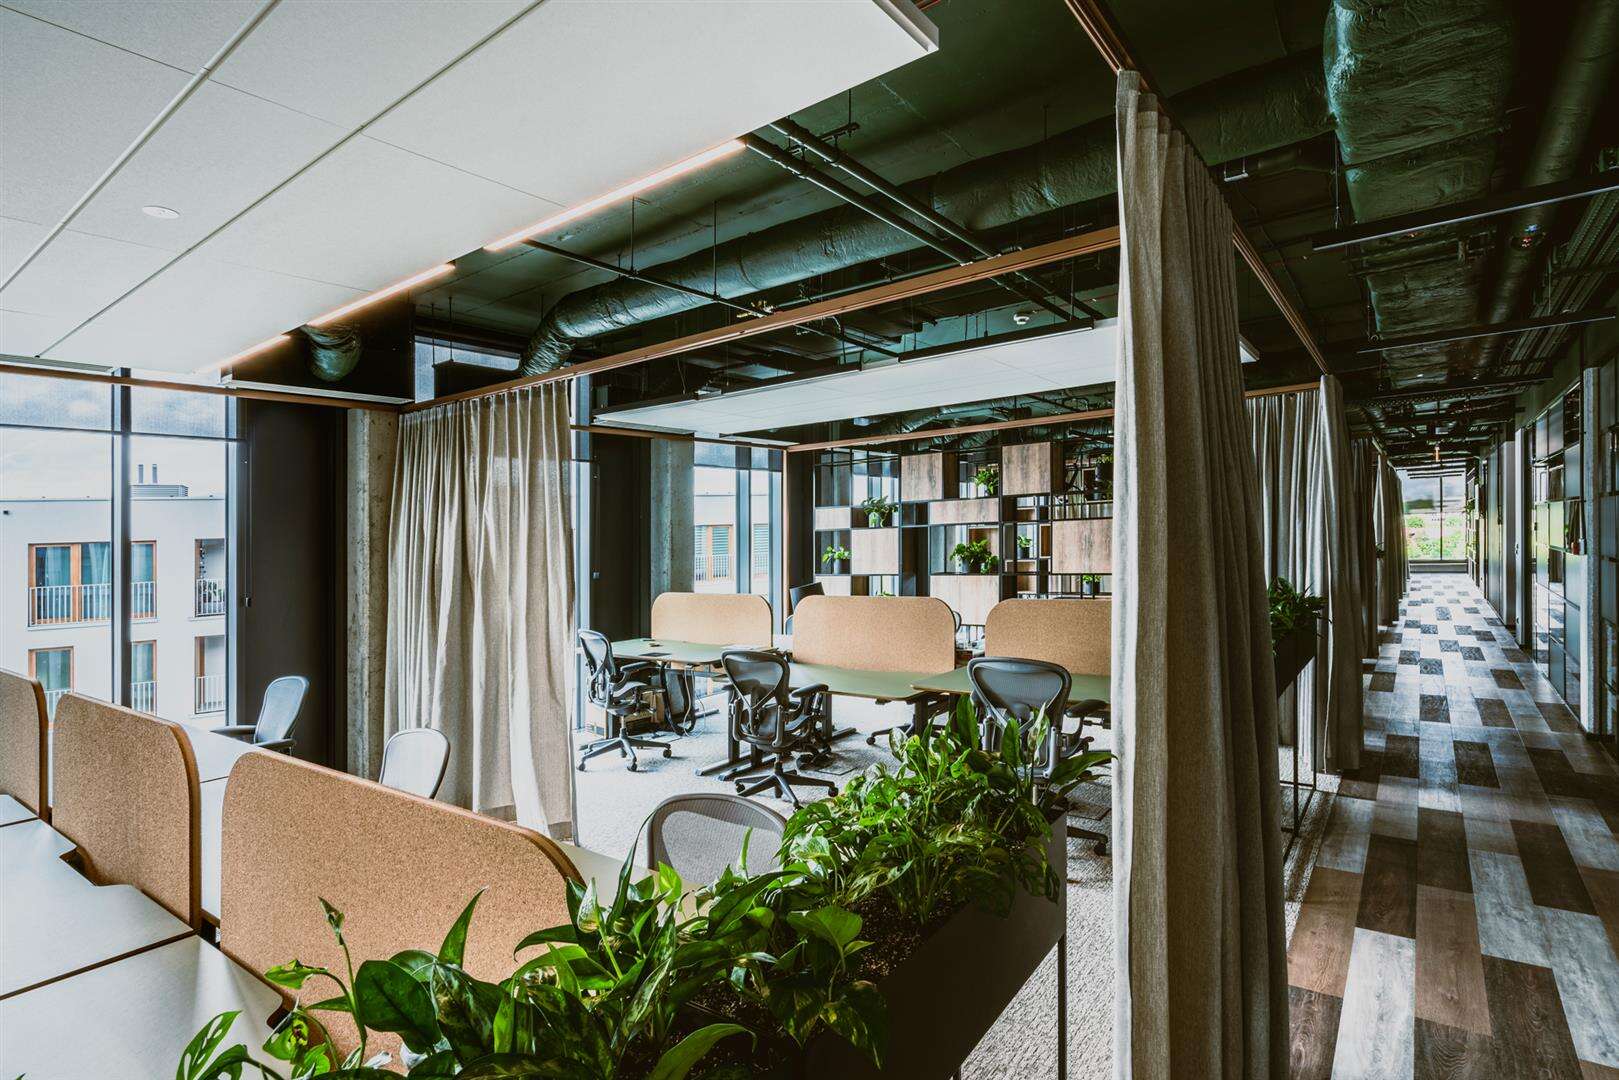 Cork dividers, plants and green painted ceilings bring the outside in at the Syzygy and Ars Thanea workplace in Warsaw, Poland